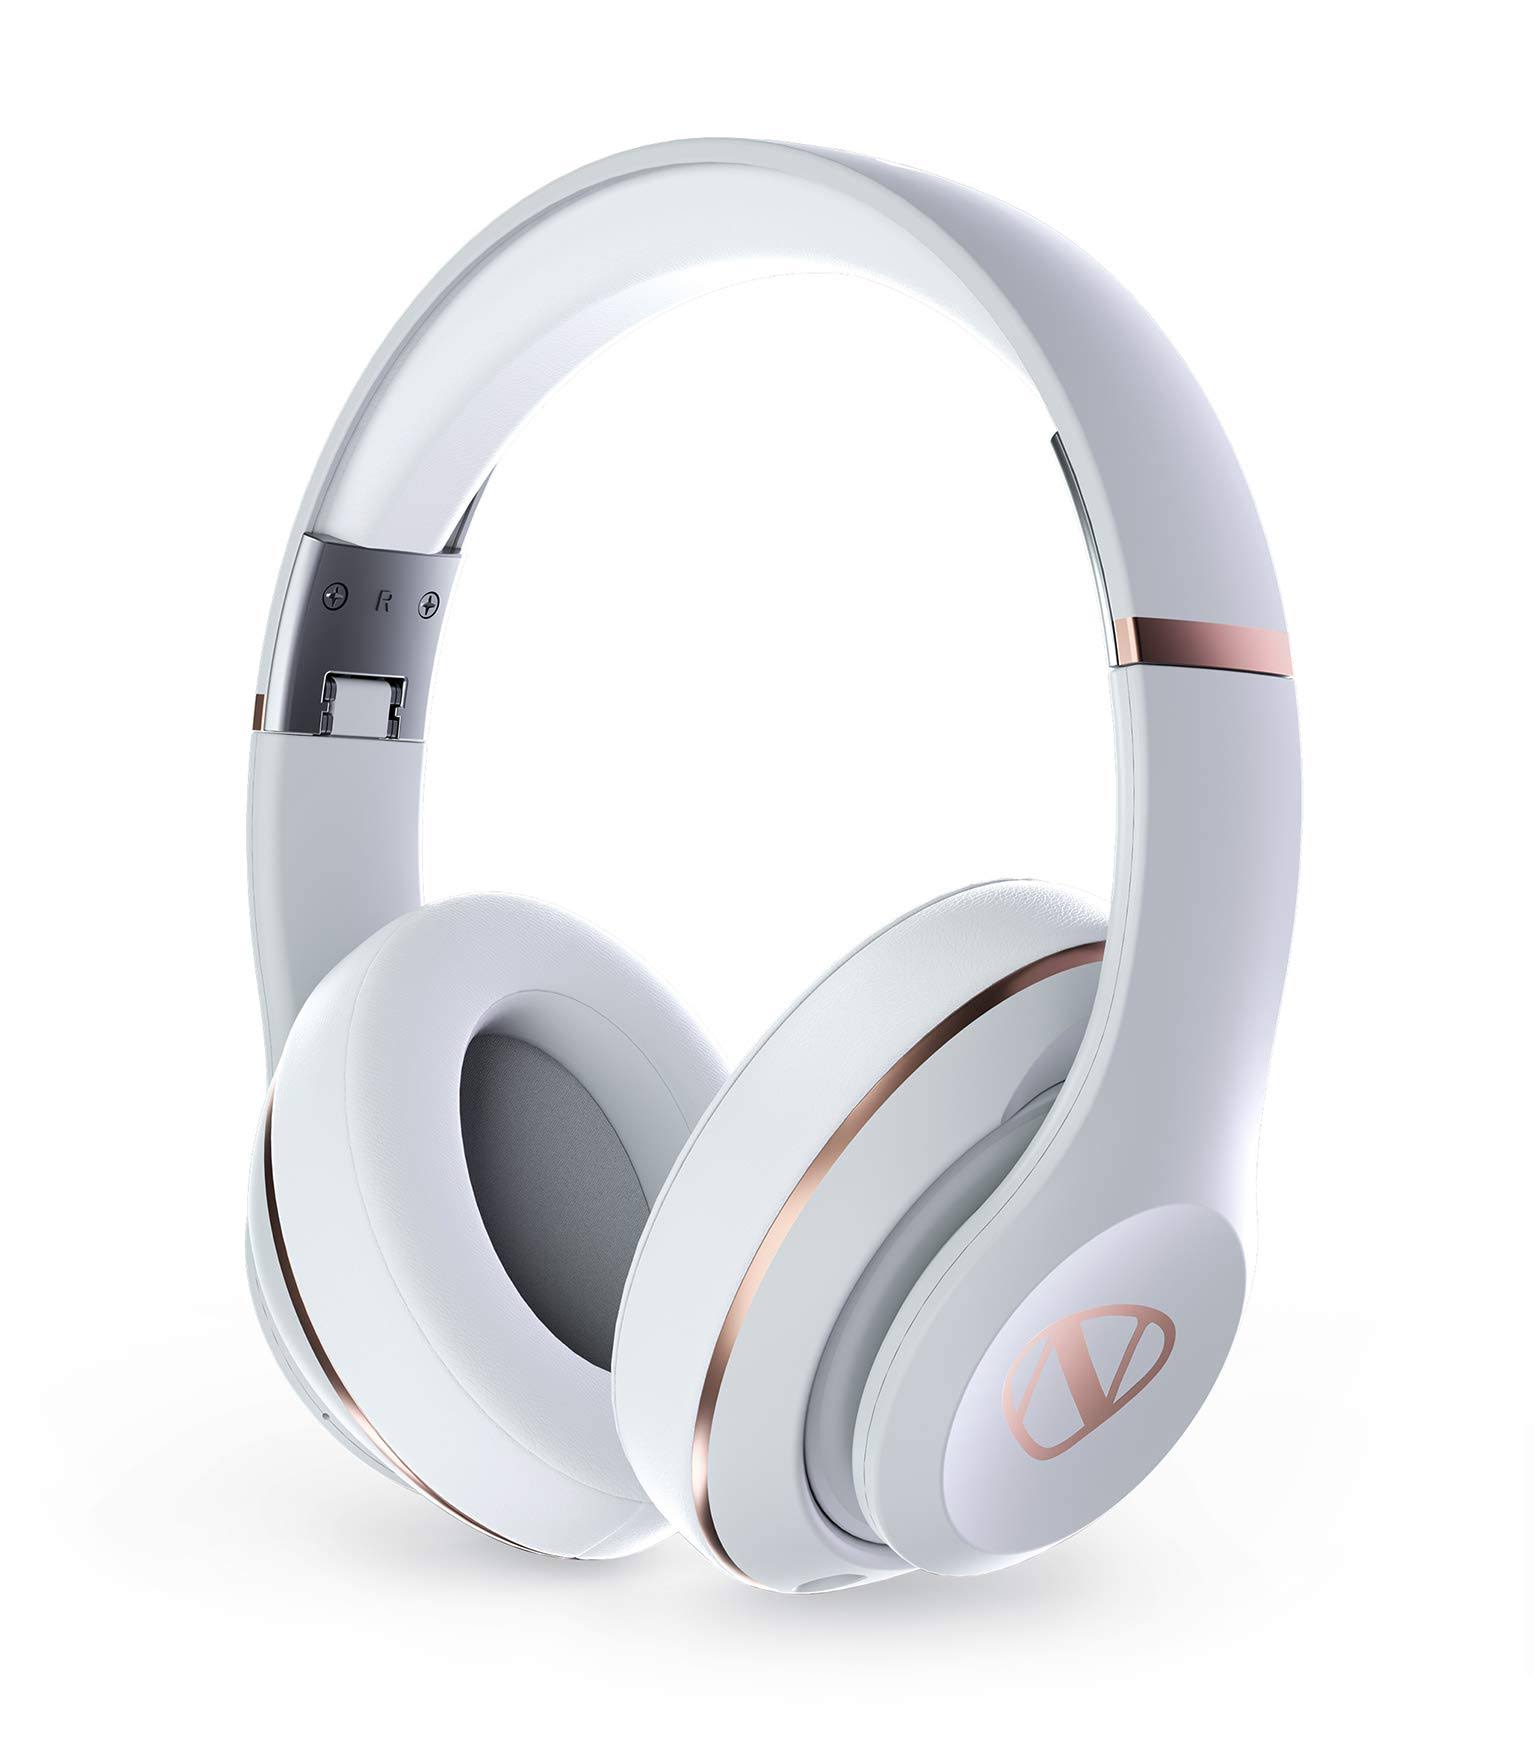 Ncredible2 Over-Ear Wireless Bluetooth Headphones White/Rose Gold